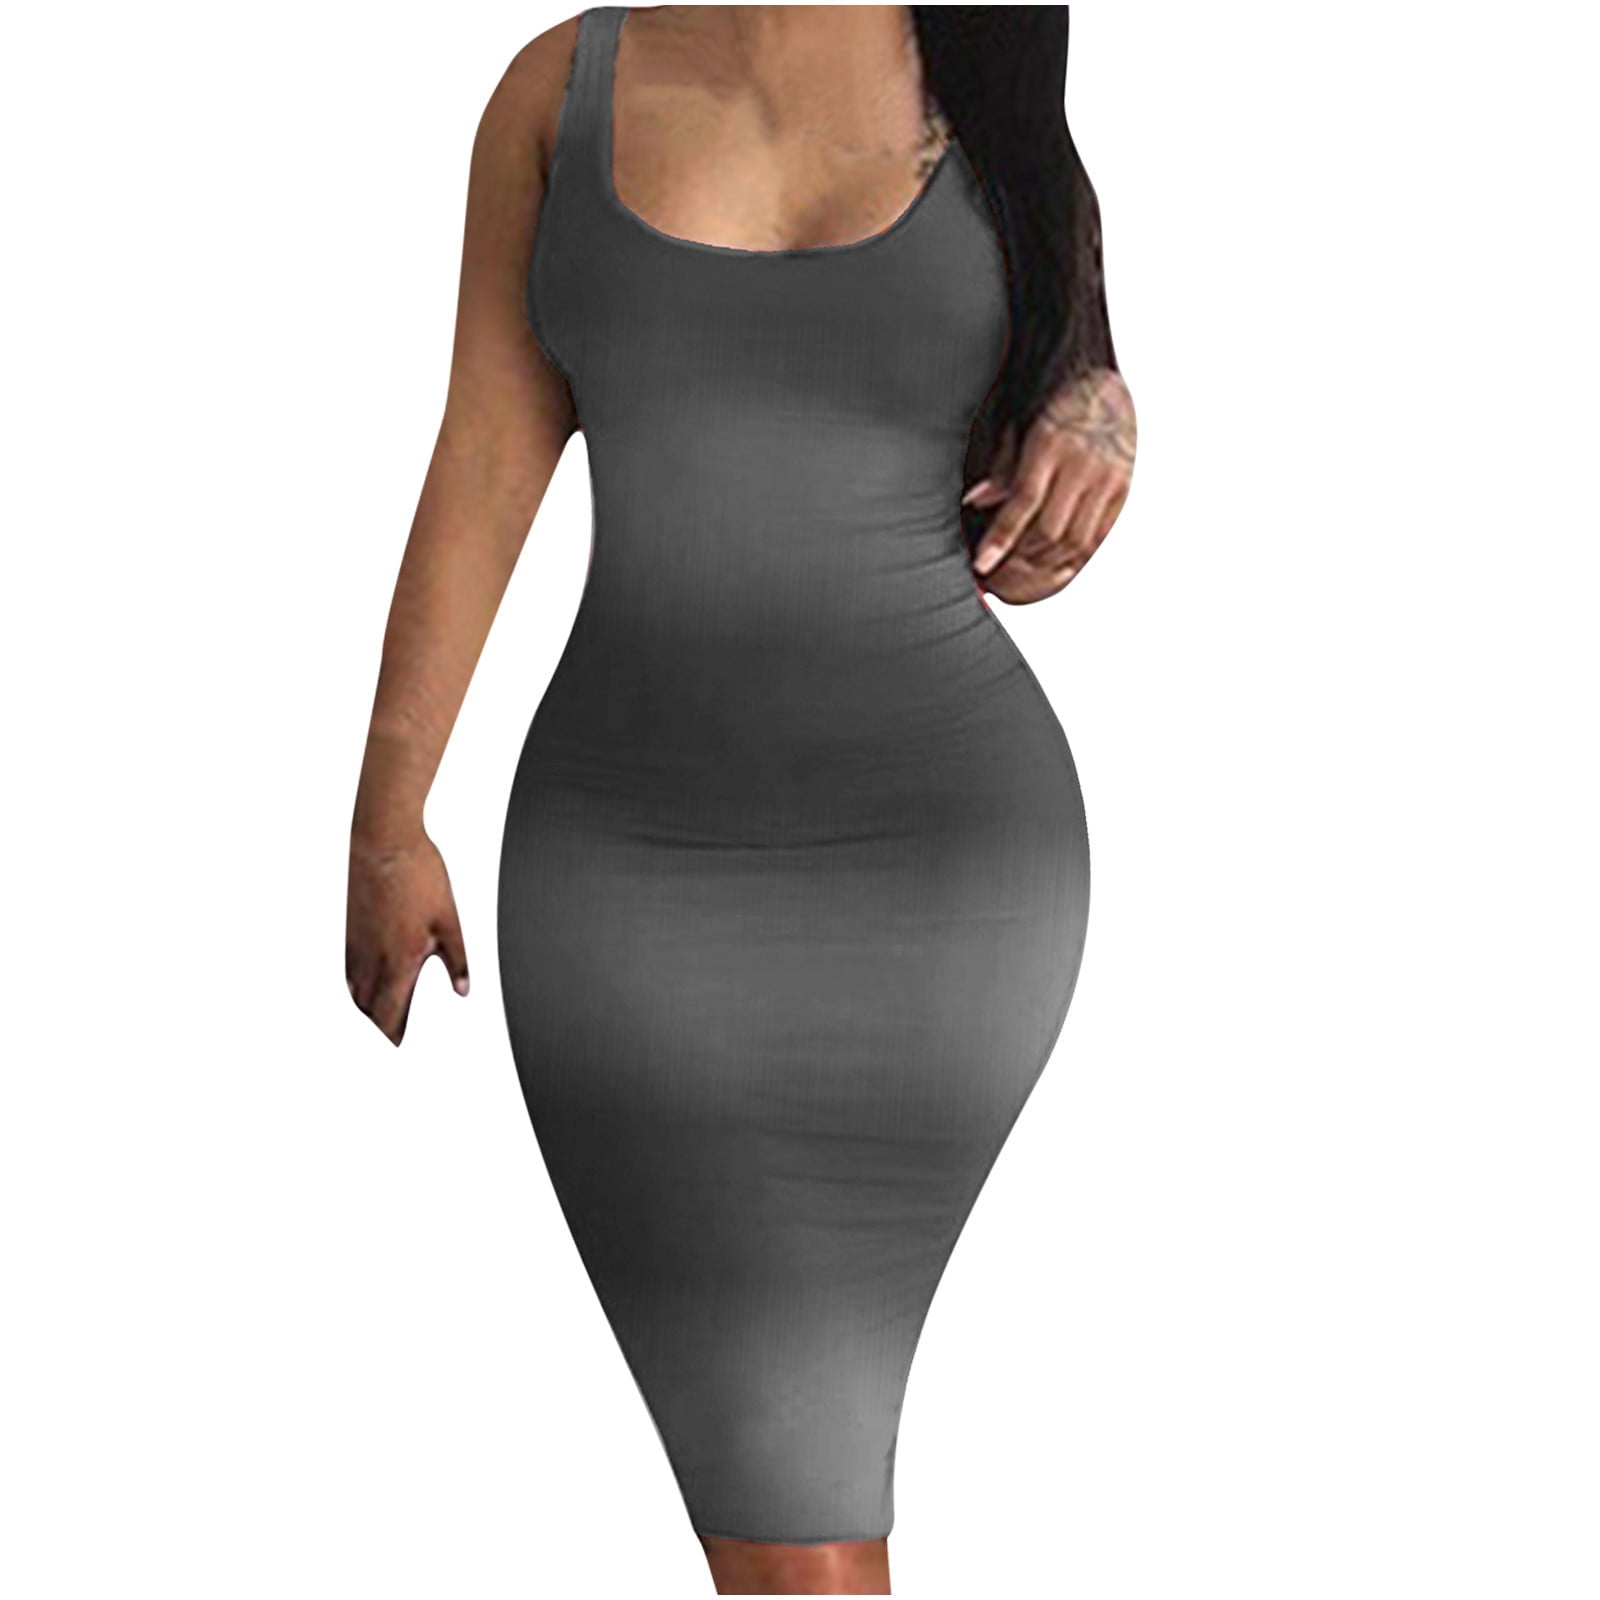  Y2K Hoodie Solid Color Shoulder,Ladies Dresses On  Clearance,Clearance Store,Cheap Stuff Under 1 Dollar for Girls,Womens Tops  Sale,Plus Size Dresses Under 10 Dollars,Blank T Shirts Bulk : Clothing,  Shoes & Jewelry